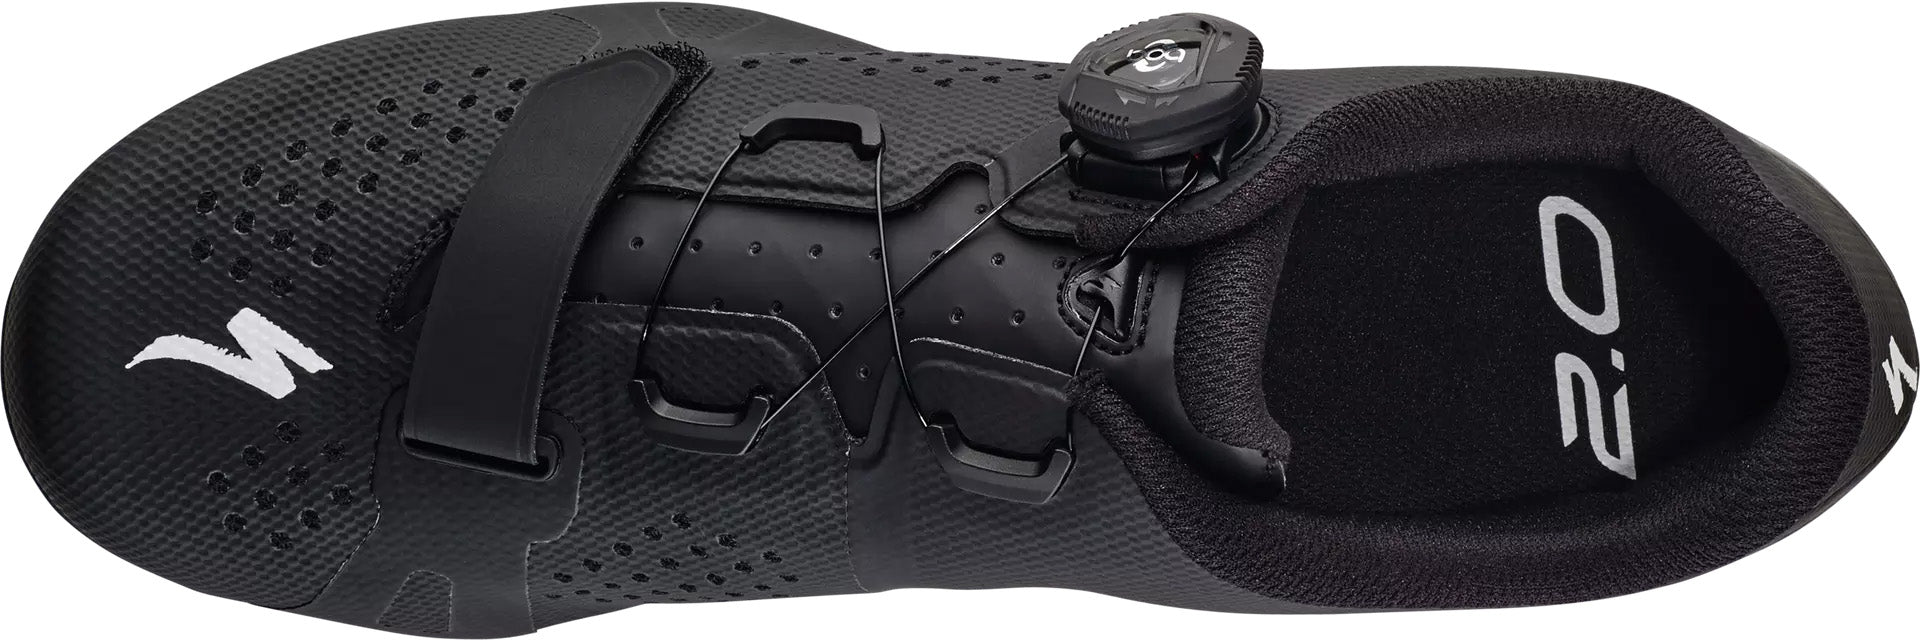 Specialized Torch 2.0 Road Bike Shoes Black